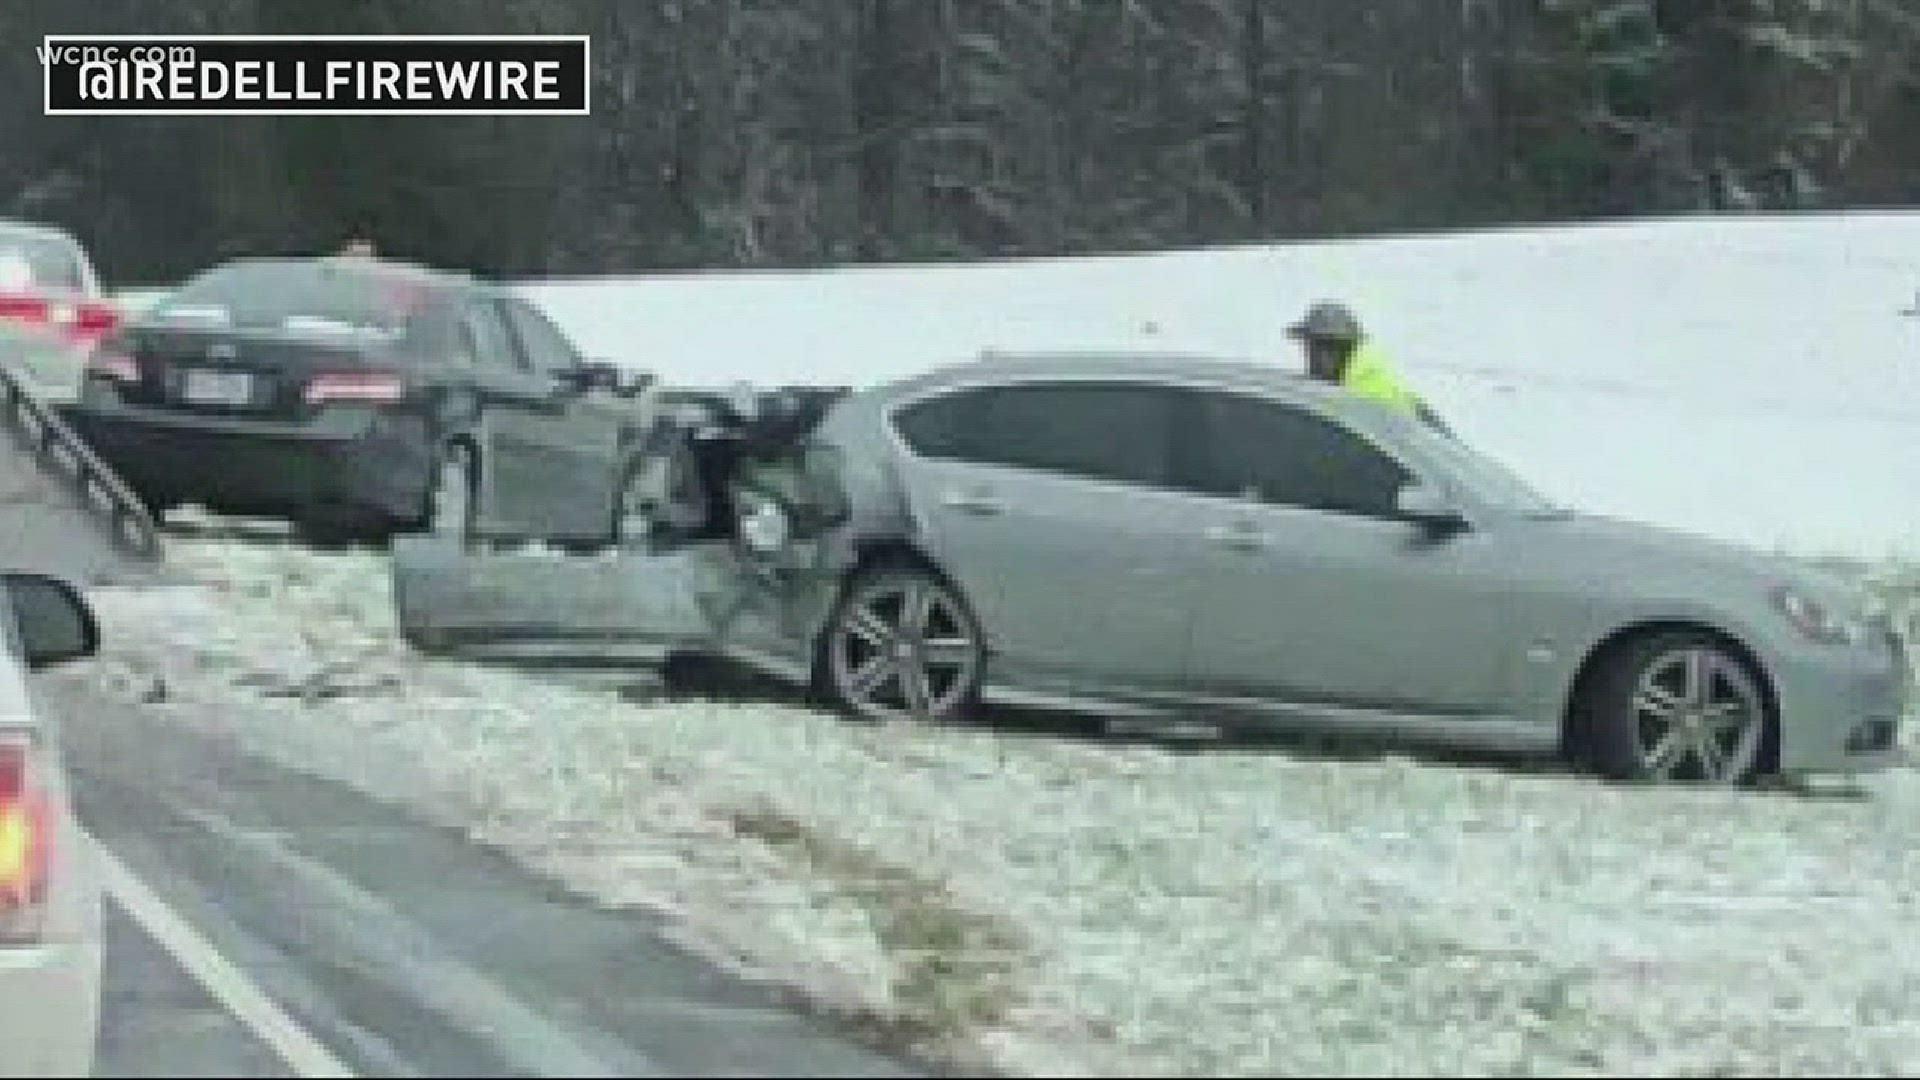 After a winter blast hit the Carolinas, troopers urged drivers to stay off the roads Monday night, especially in the upper elevations.